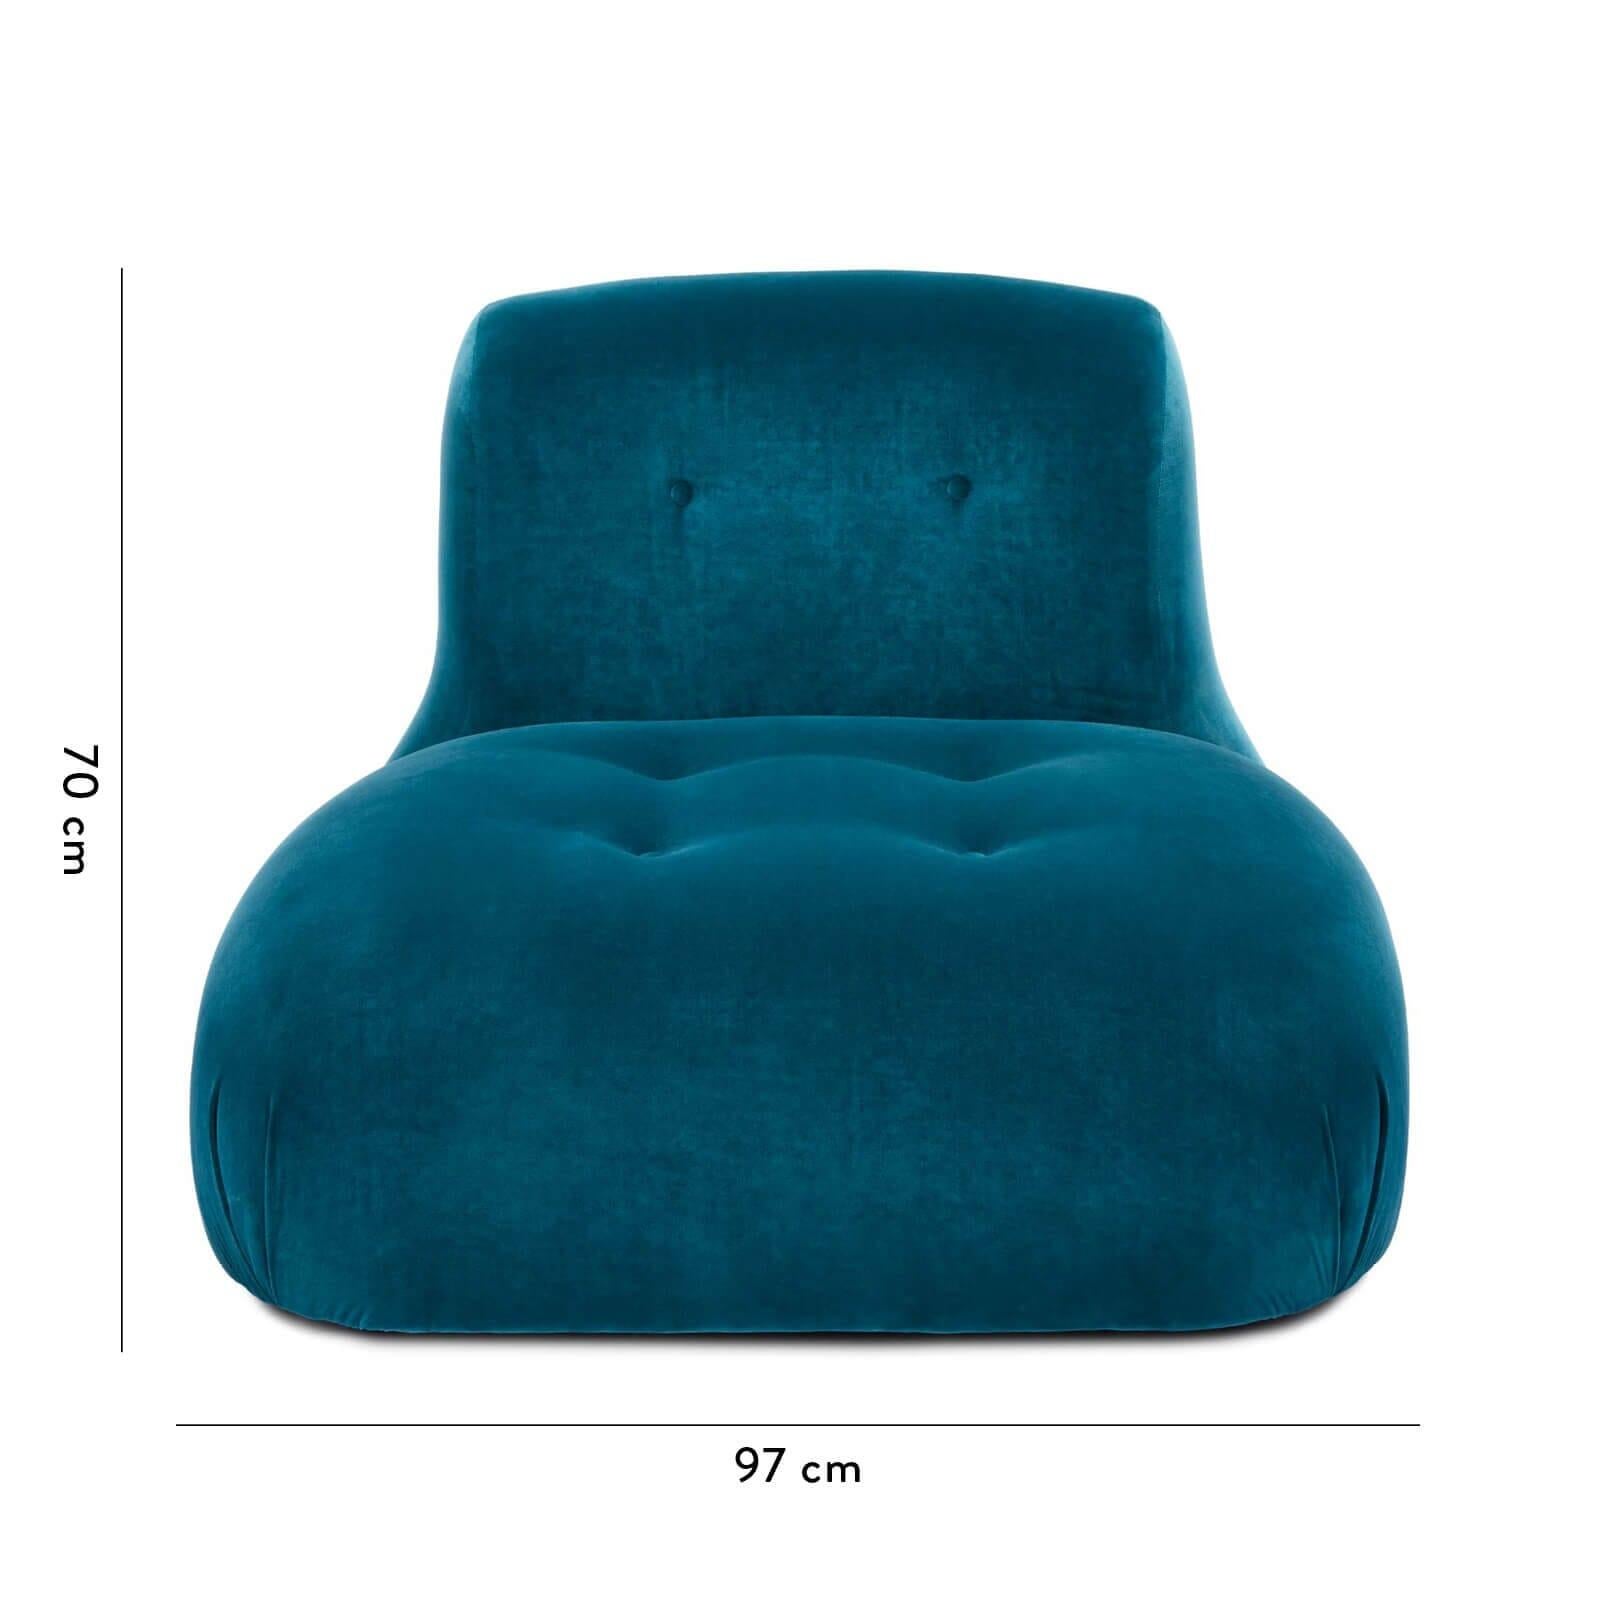 Our take on the modular sofas of the 1960's modernist movement, the Castle chair is the epitome of laid-back style quite literally, with its low-lying shape creating an instantly relaxed vibe for cinema rooms, reading rooms or living rooms. And yet